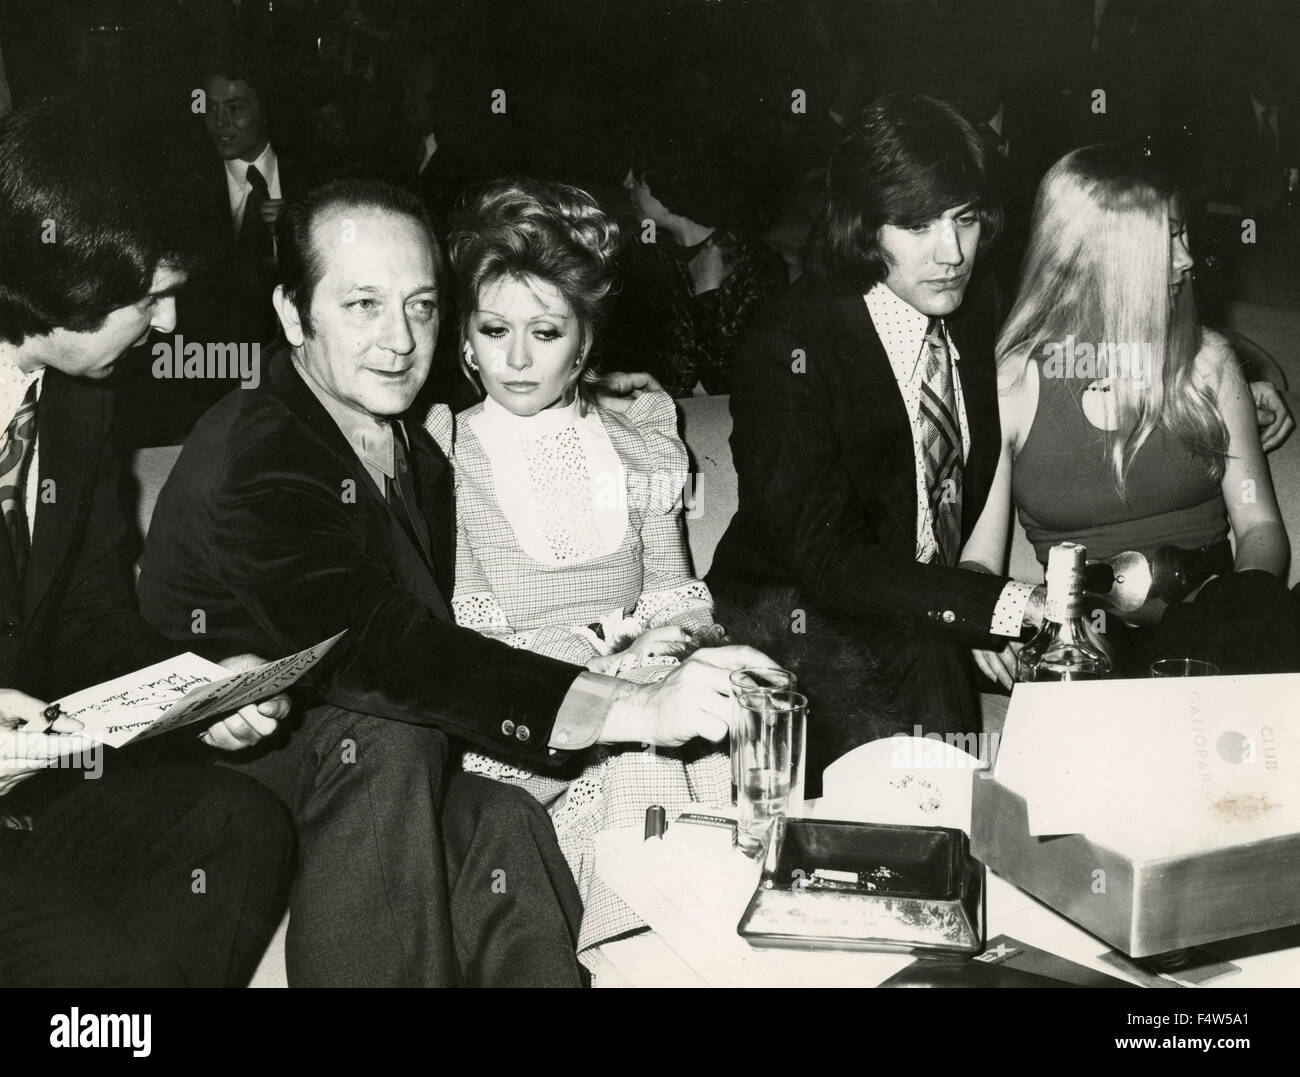 The singer Mal of the Primitives with friends at a table in the nightclub 'Il Gattopardo', Rome, Italy Stock Photo